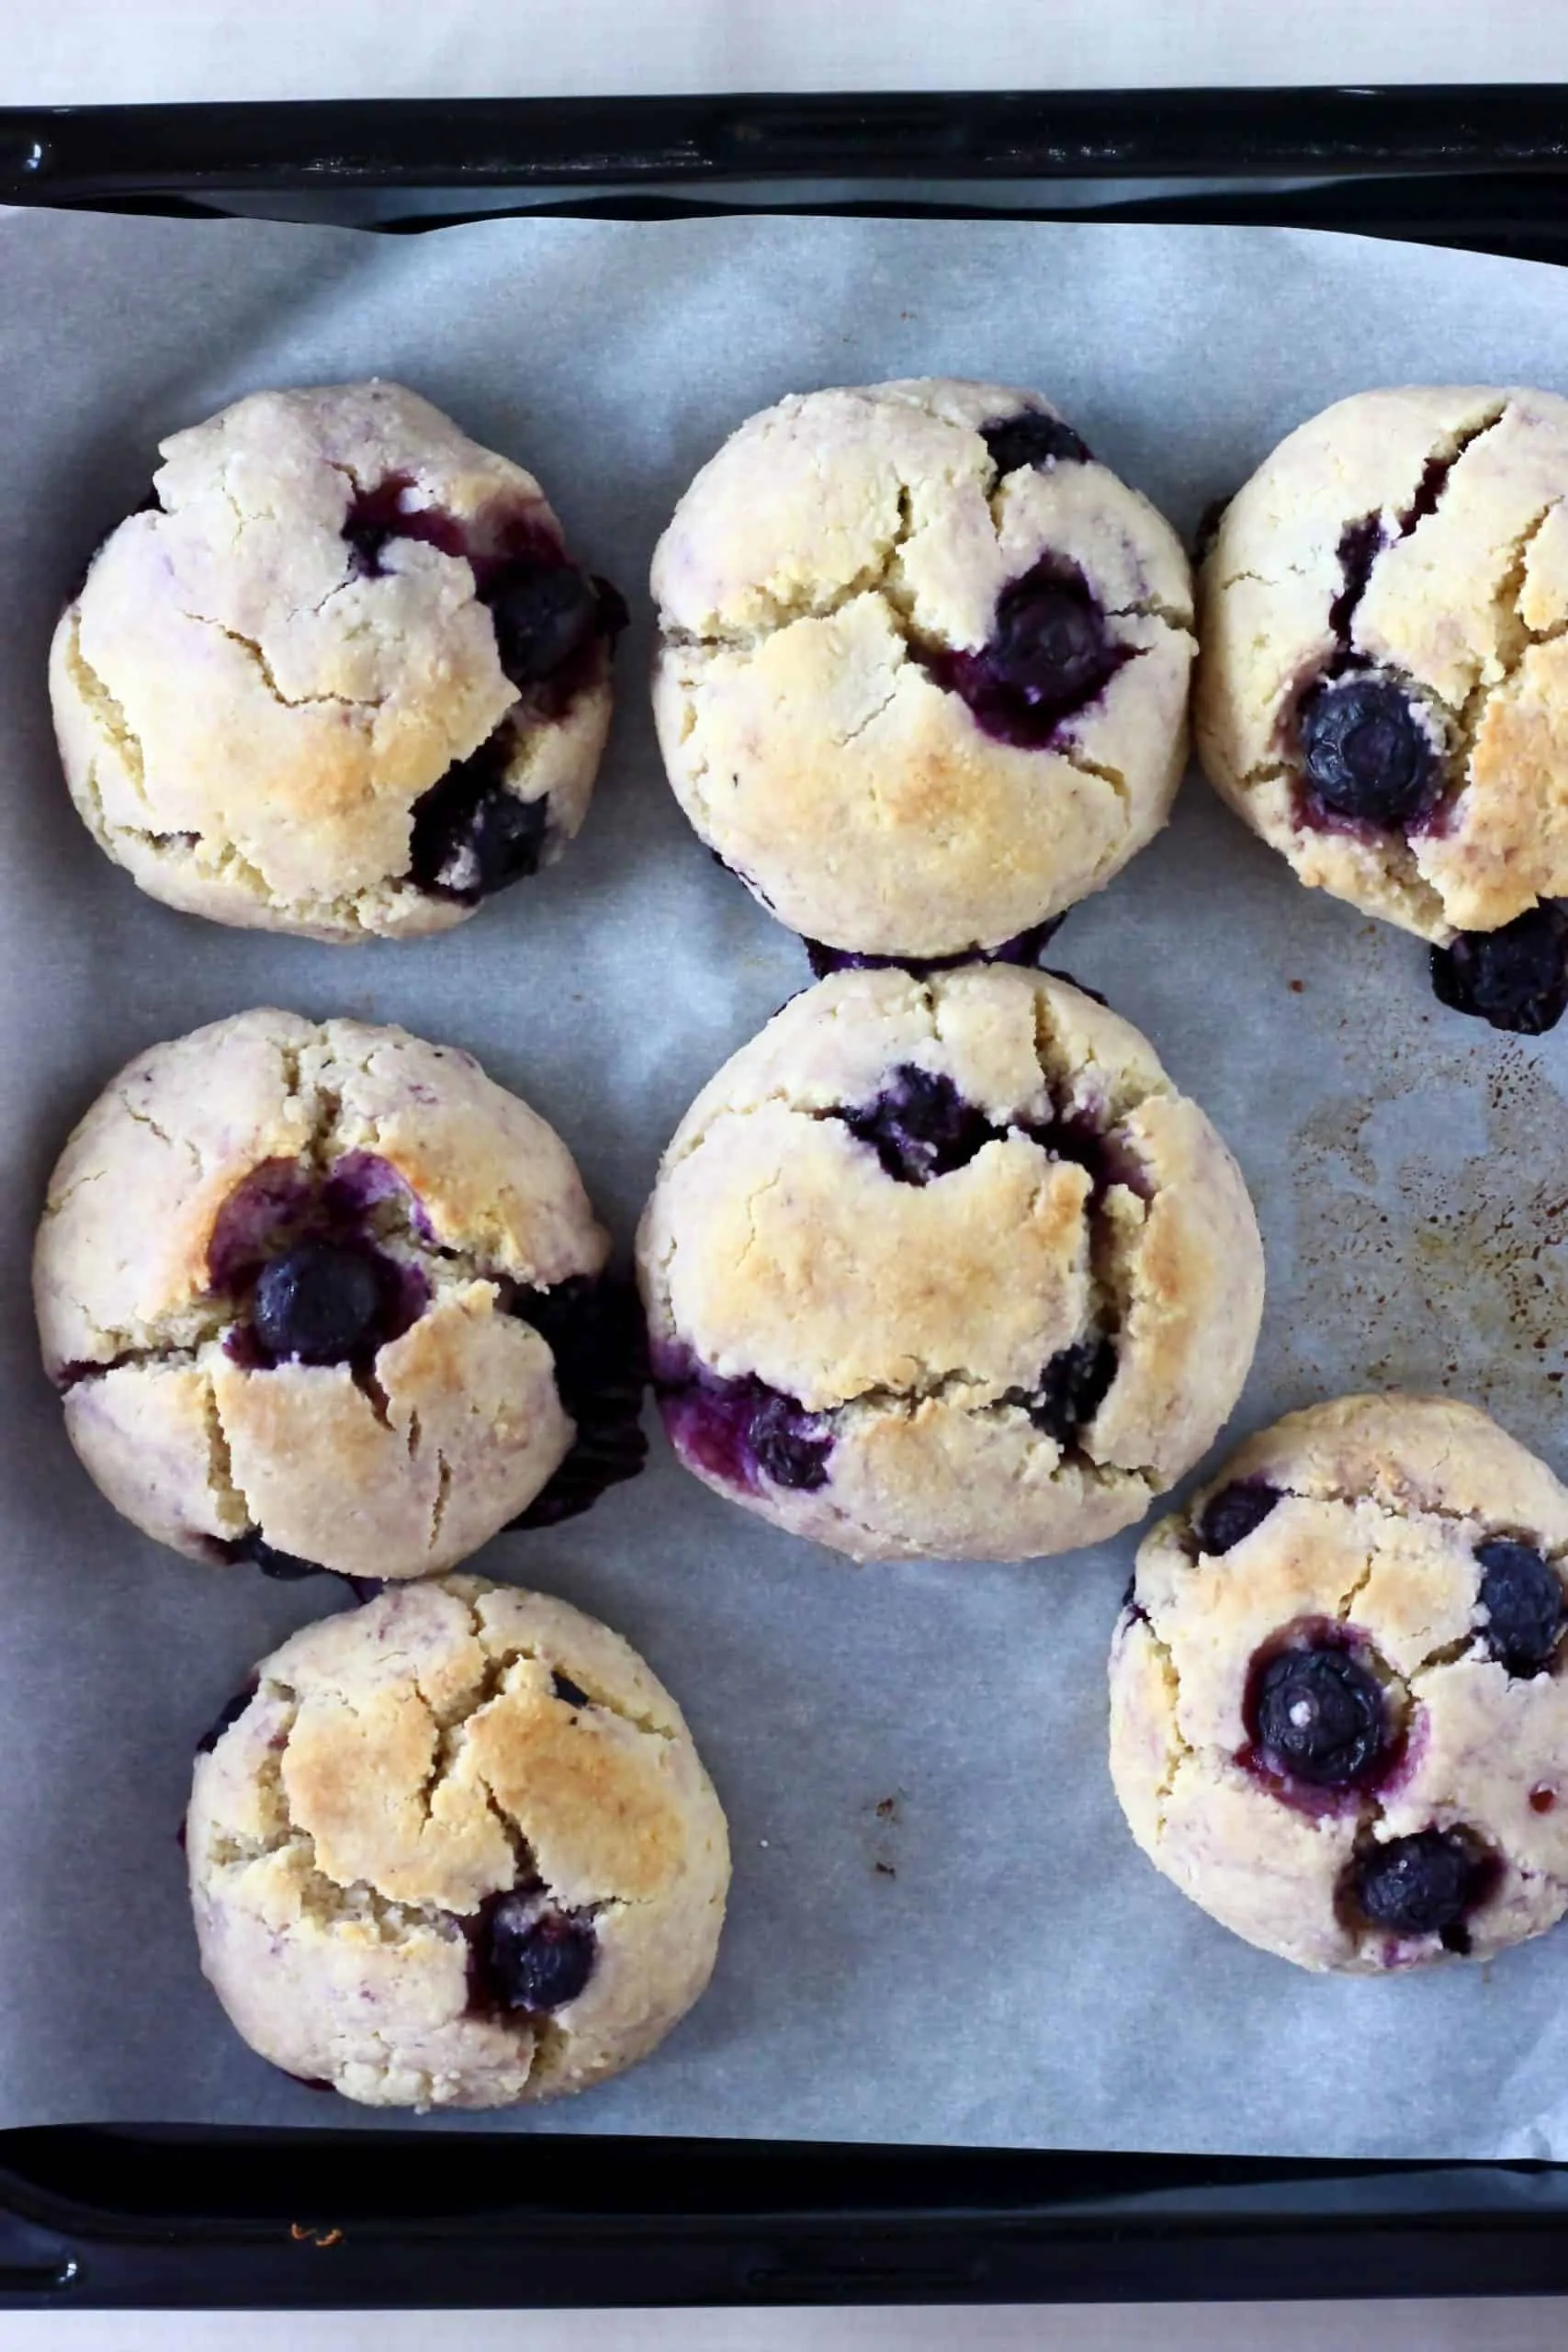 Seven gluten-free vegan lemon blueberry cookies on a baking tray lined with baking paper